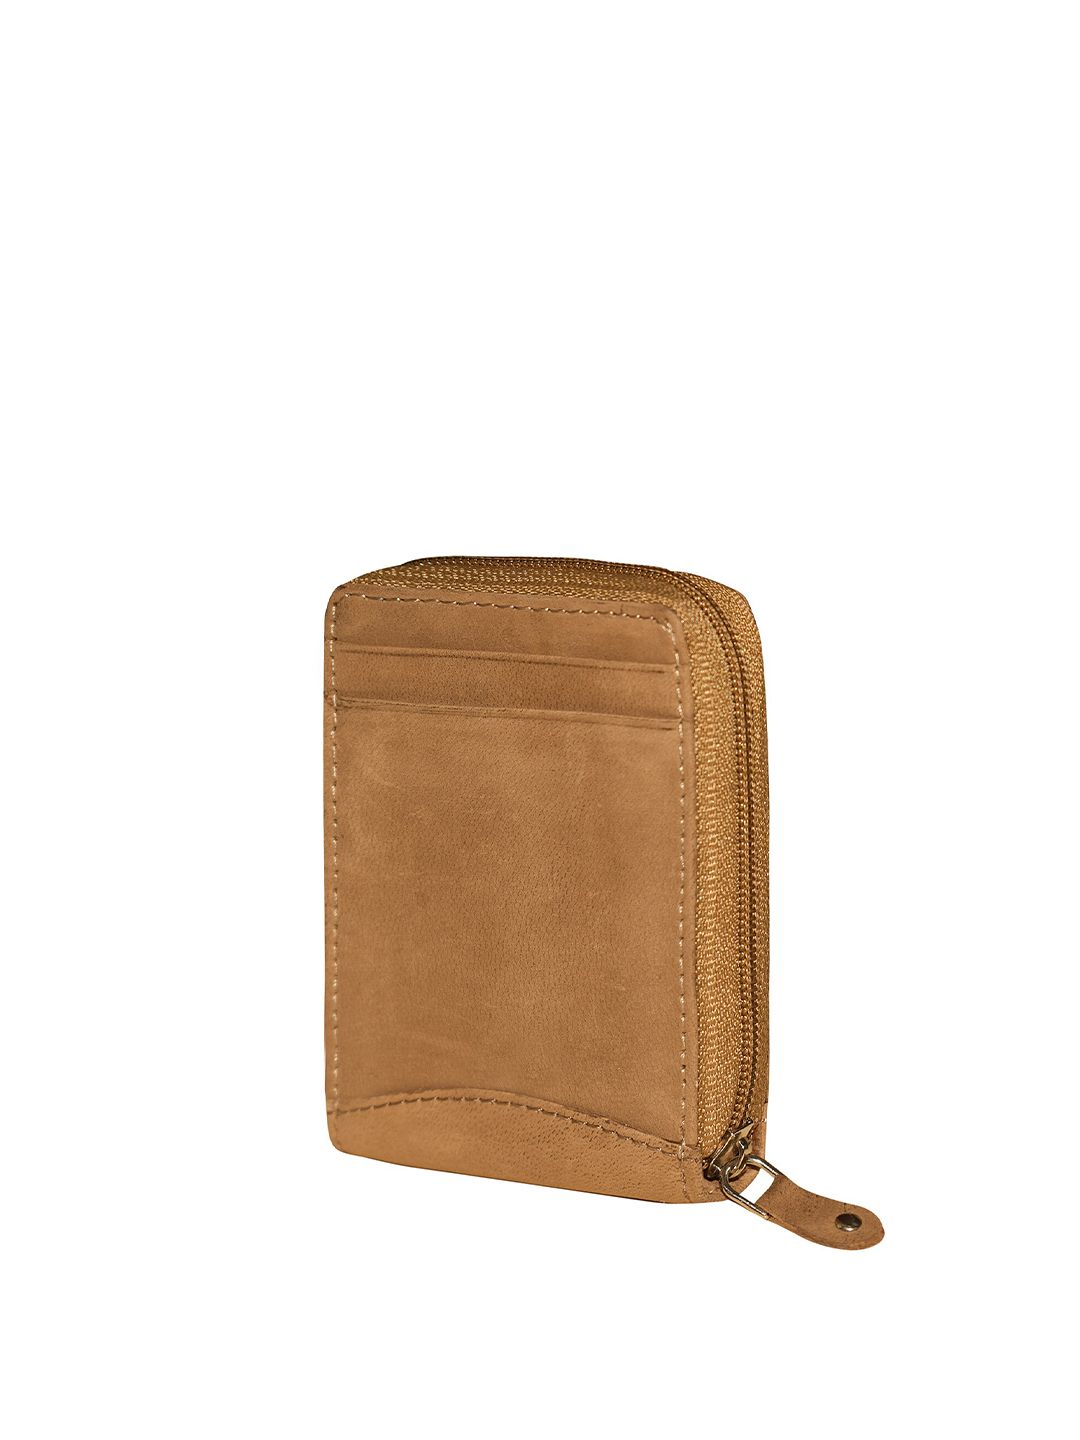 ABYS Unisex Tan Leather Card Holder Price in India